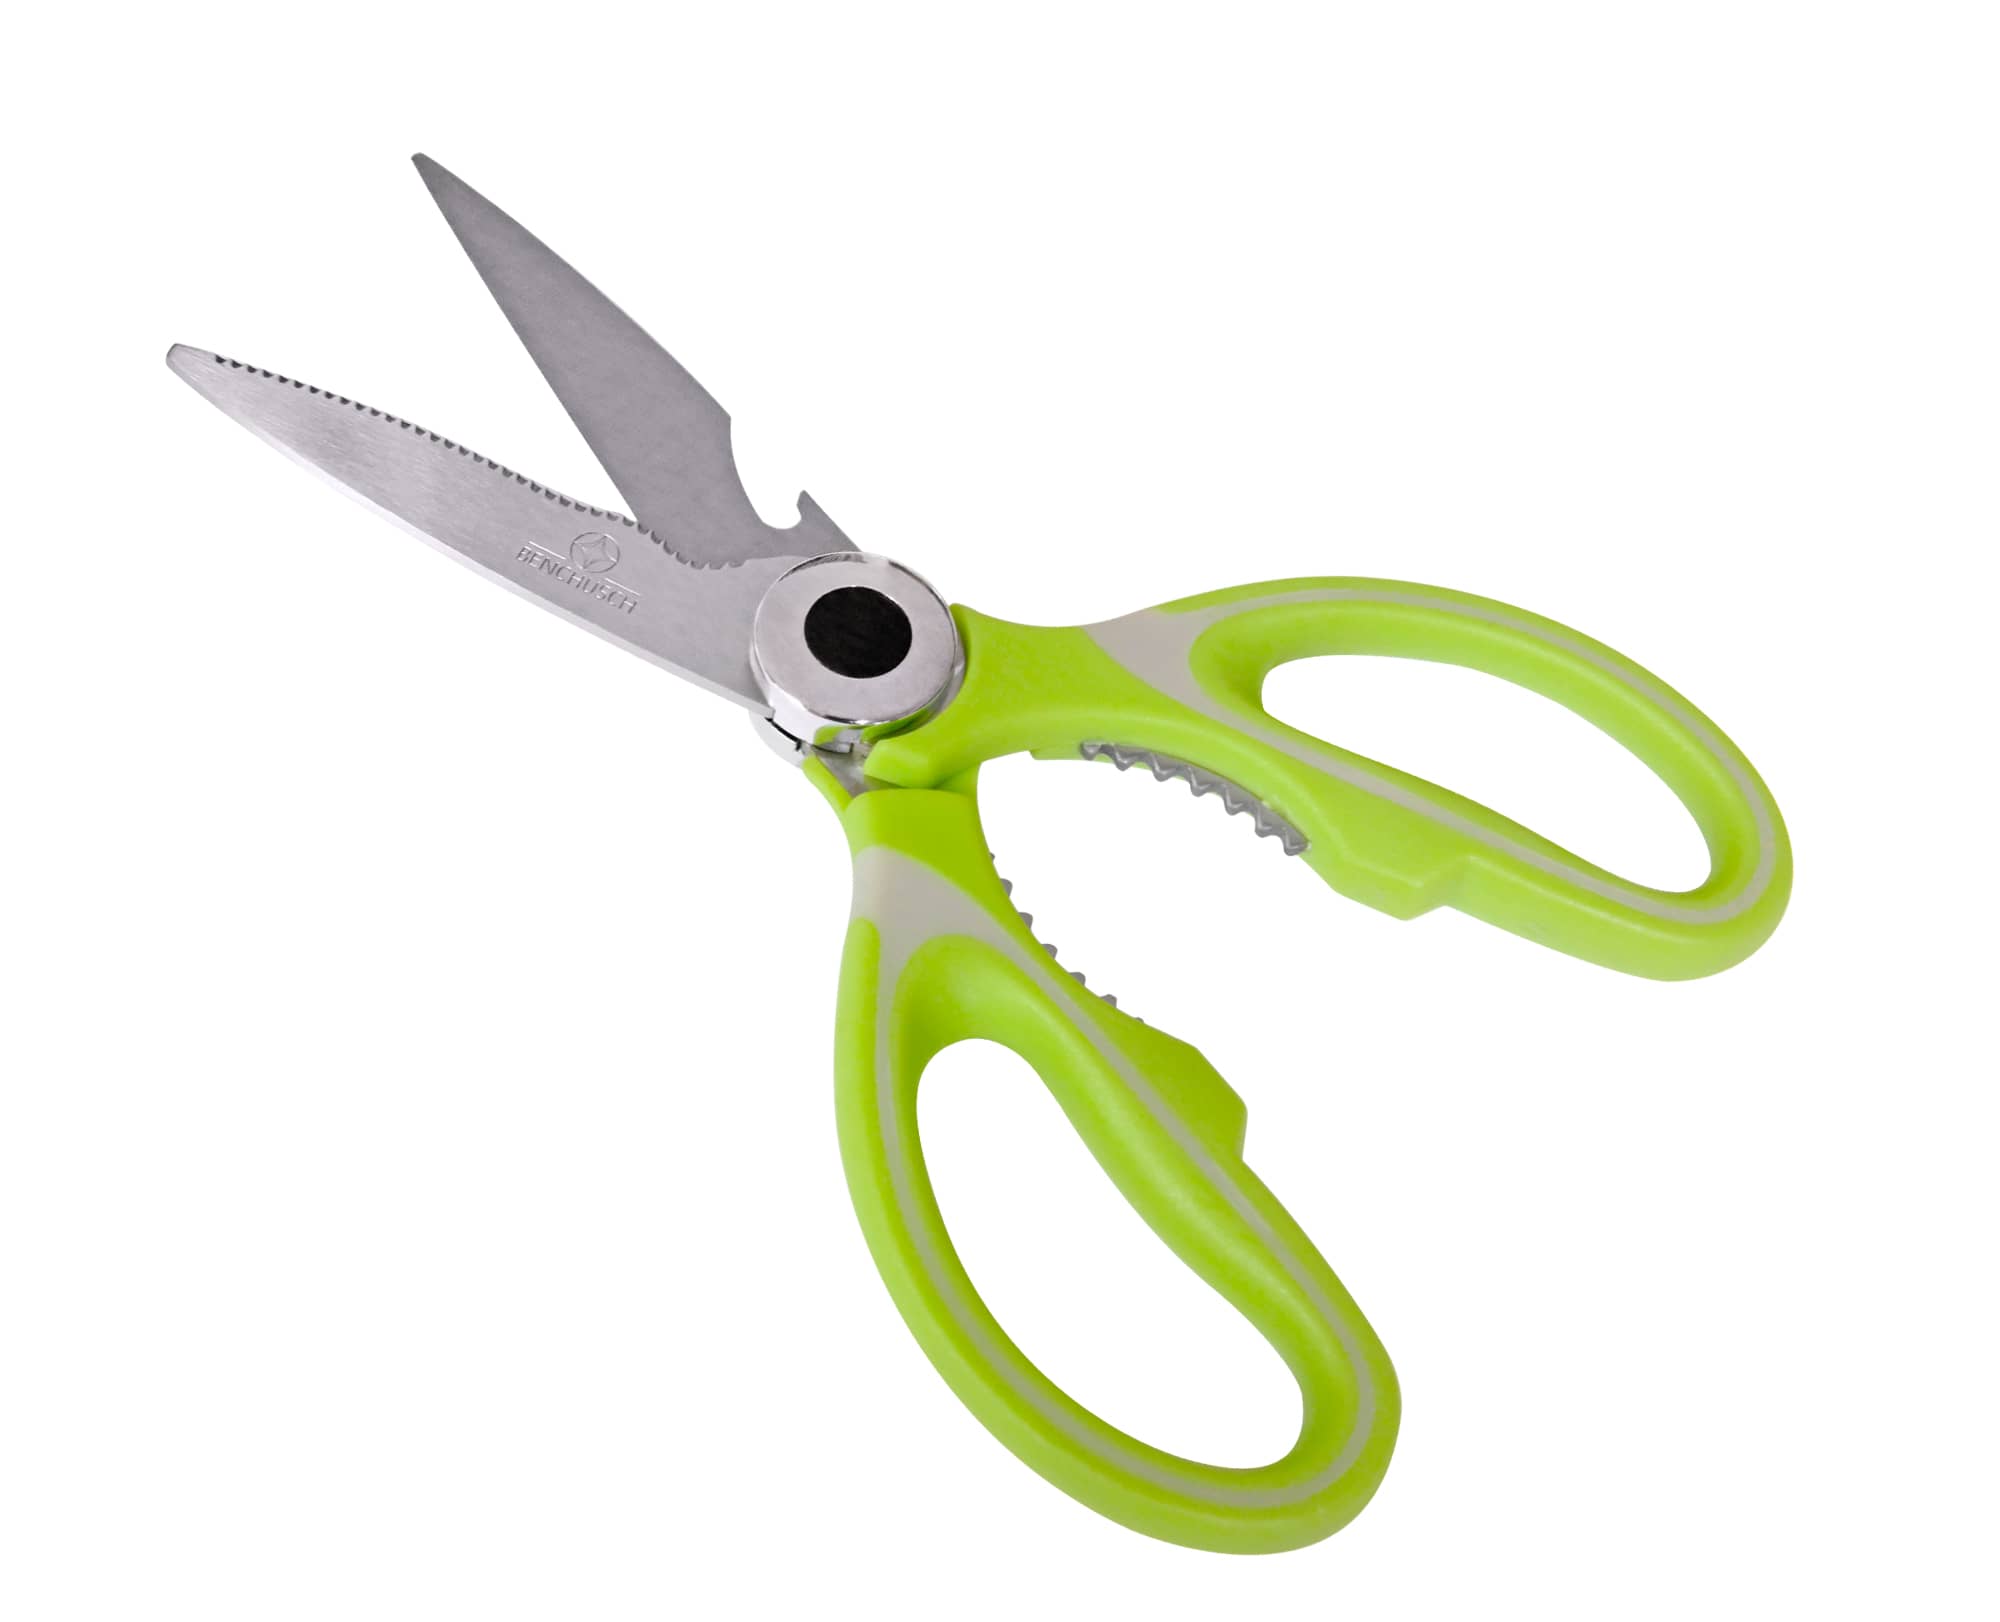 Benchusch Multipurpose Kitchen Shears, green color with stainless steel blade, PP handles